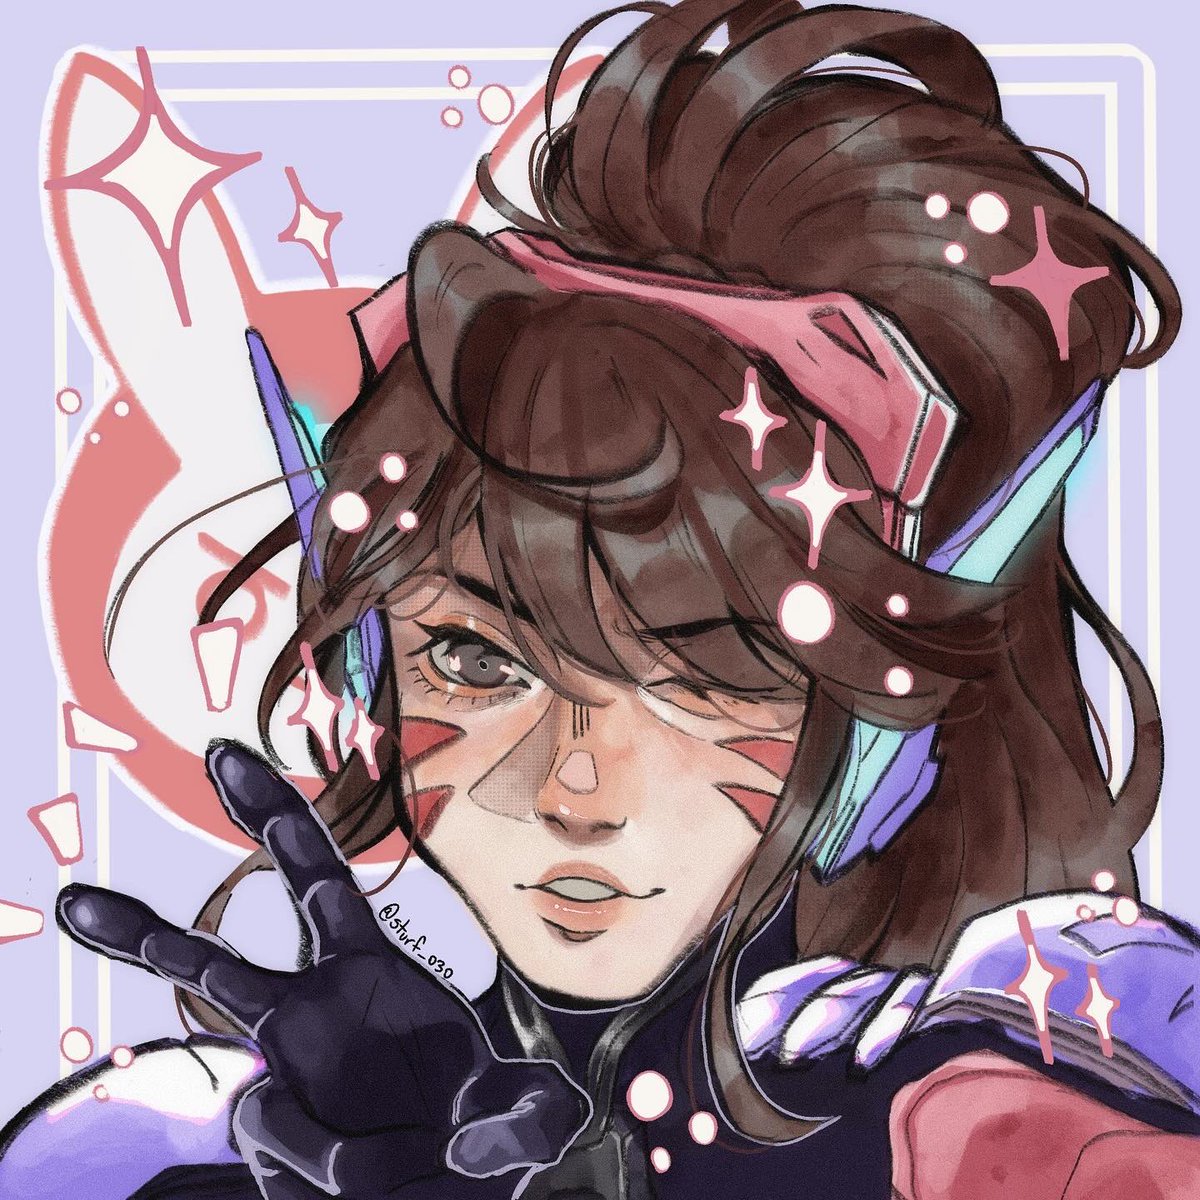 Overwatch brainrot is real had to draw D.va

#overwatch #Dva #overwatch2 #overwatchfanart